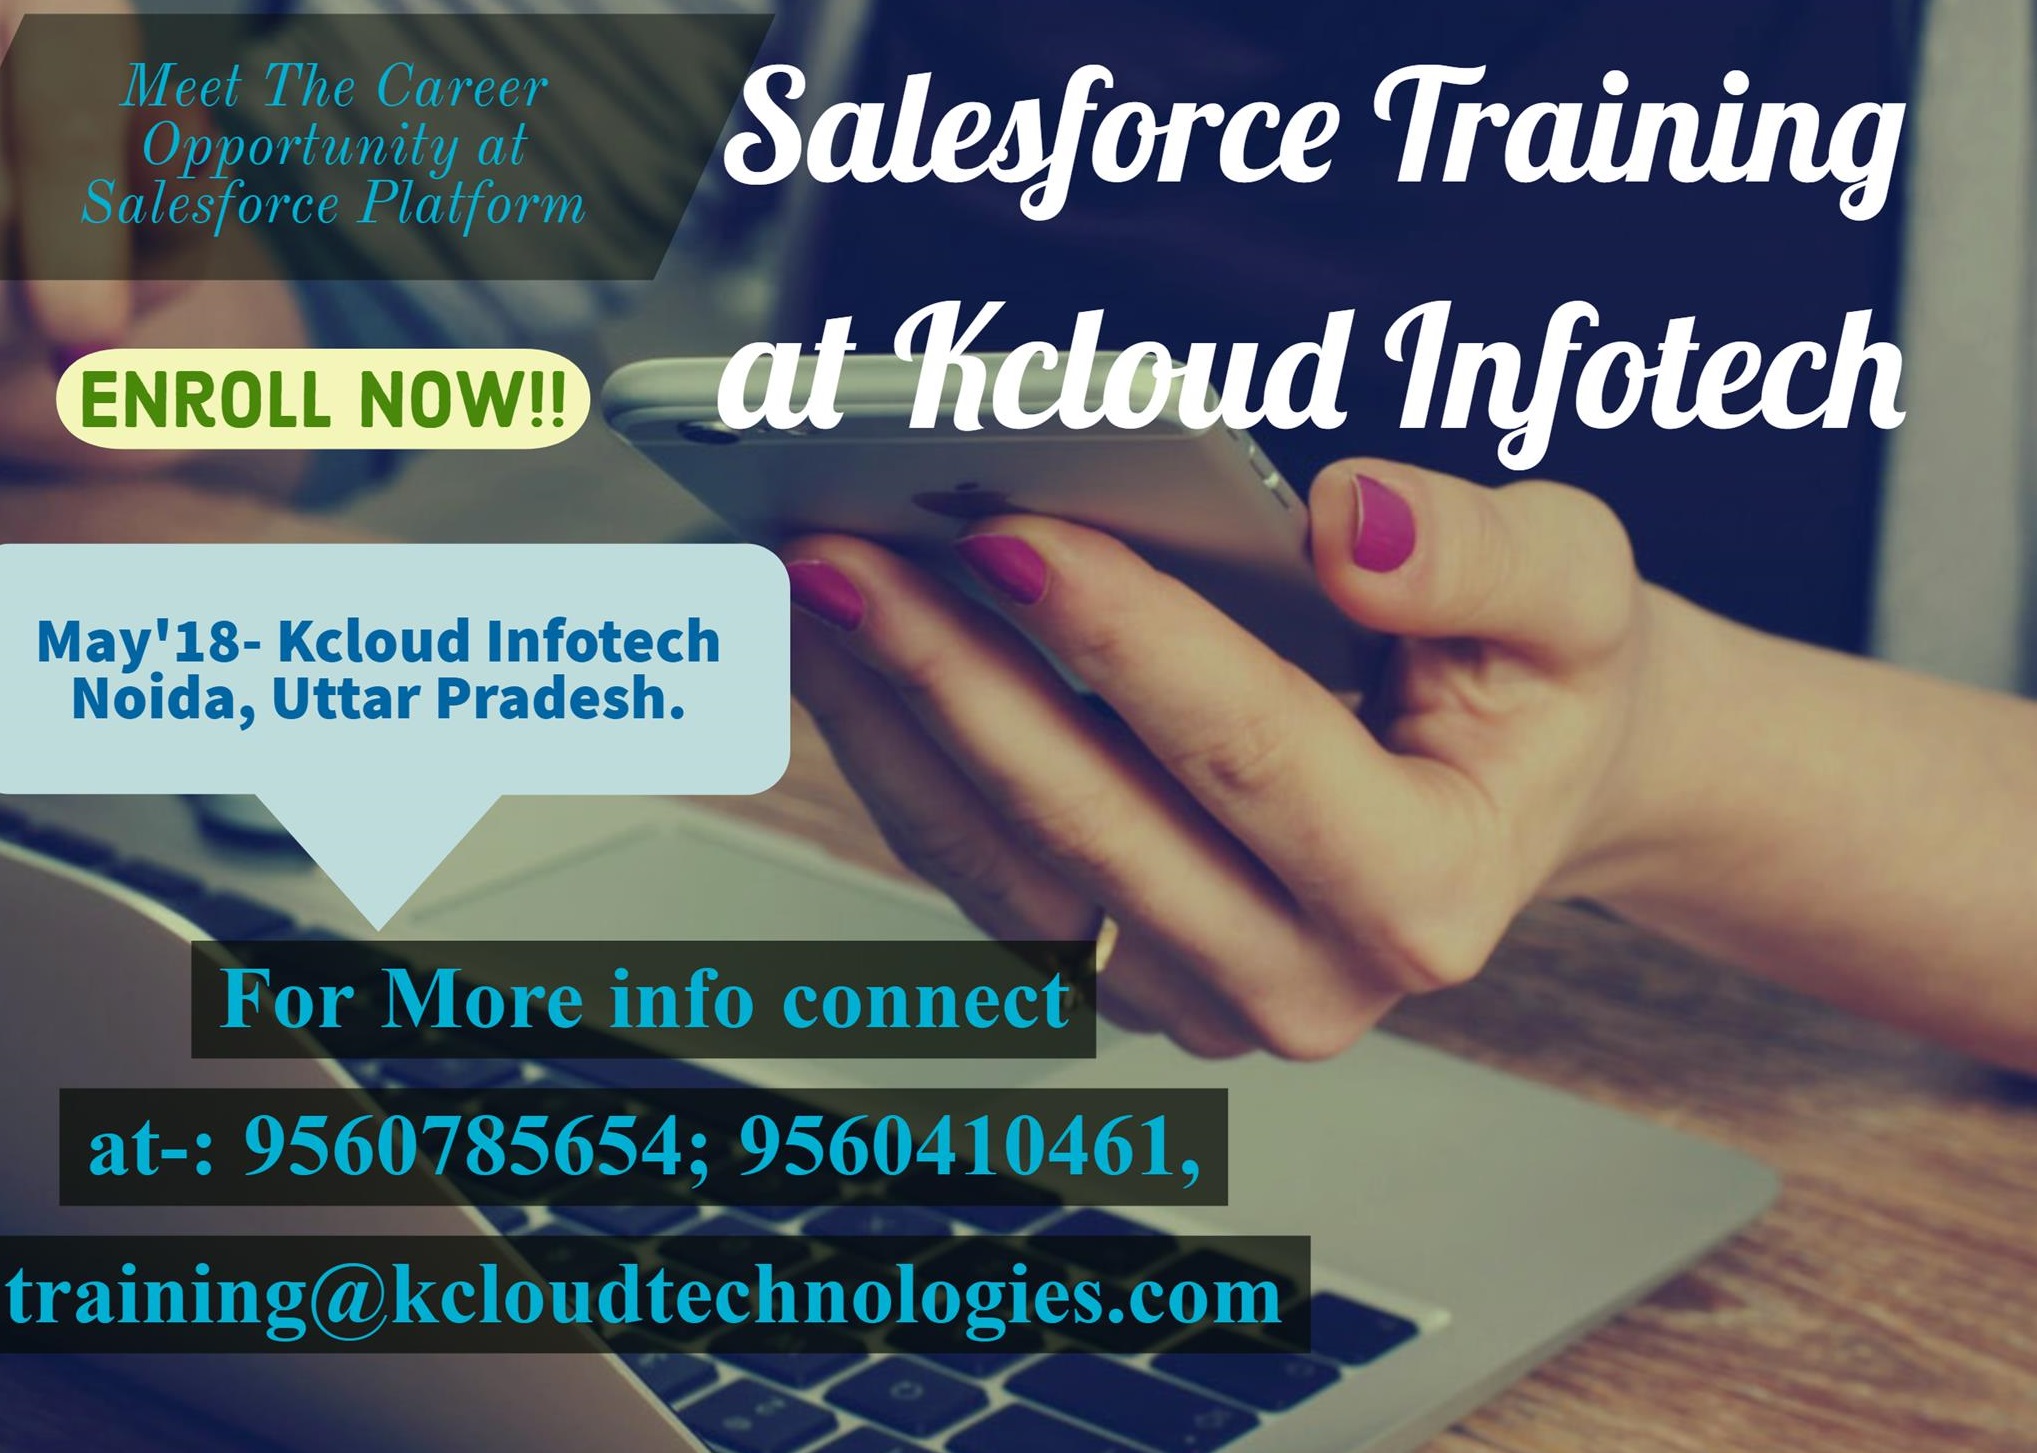 Salesforce Training Institute in Noida - Kcloud InfotechEducation and LearningCareer CounselingNoidaAghapur